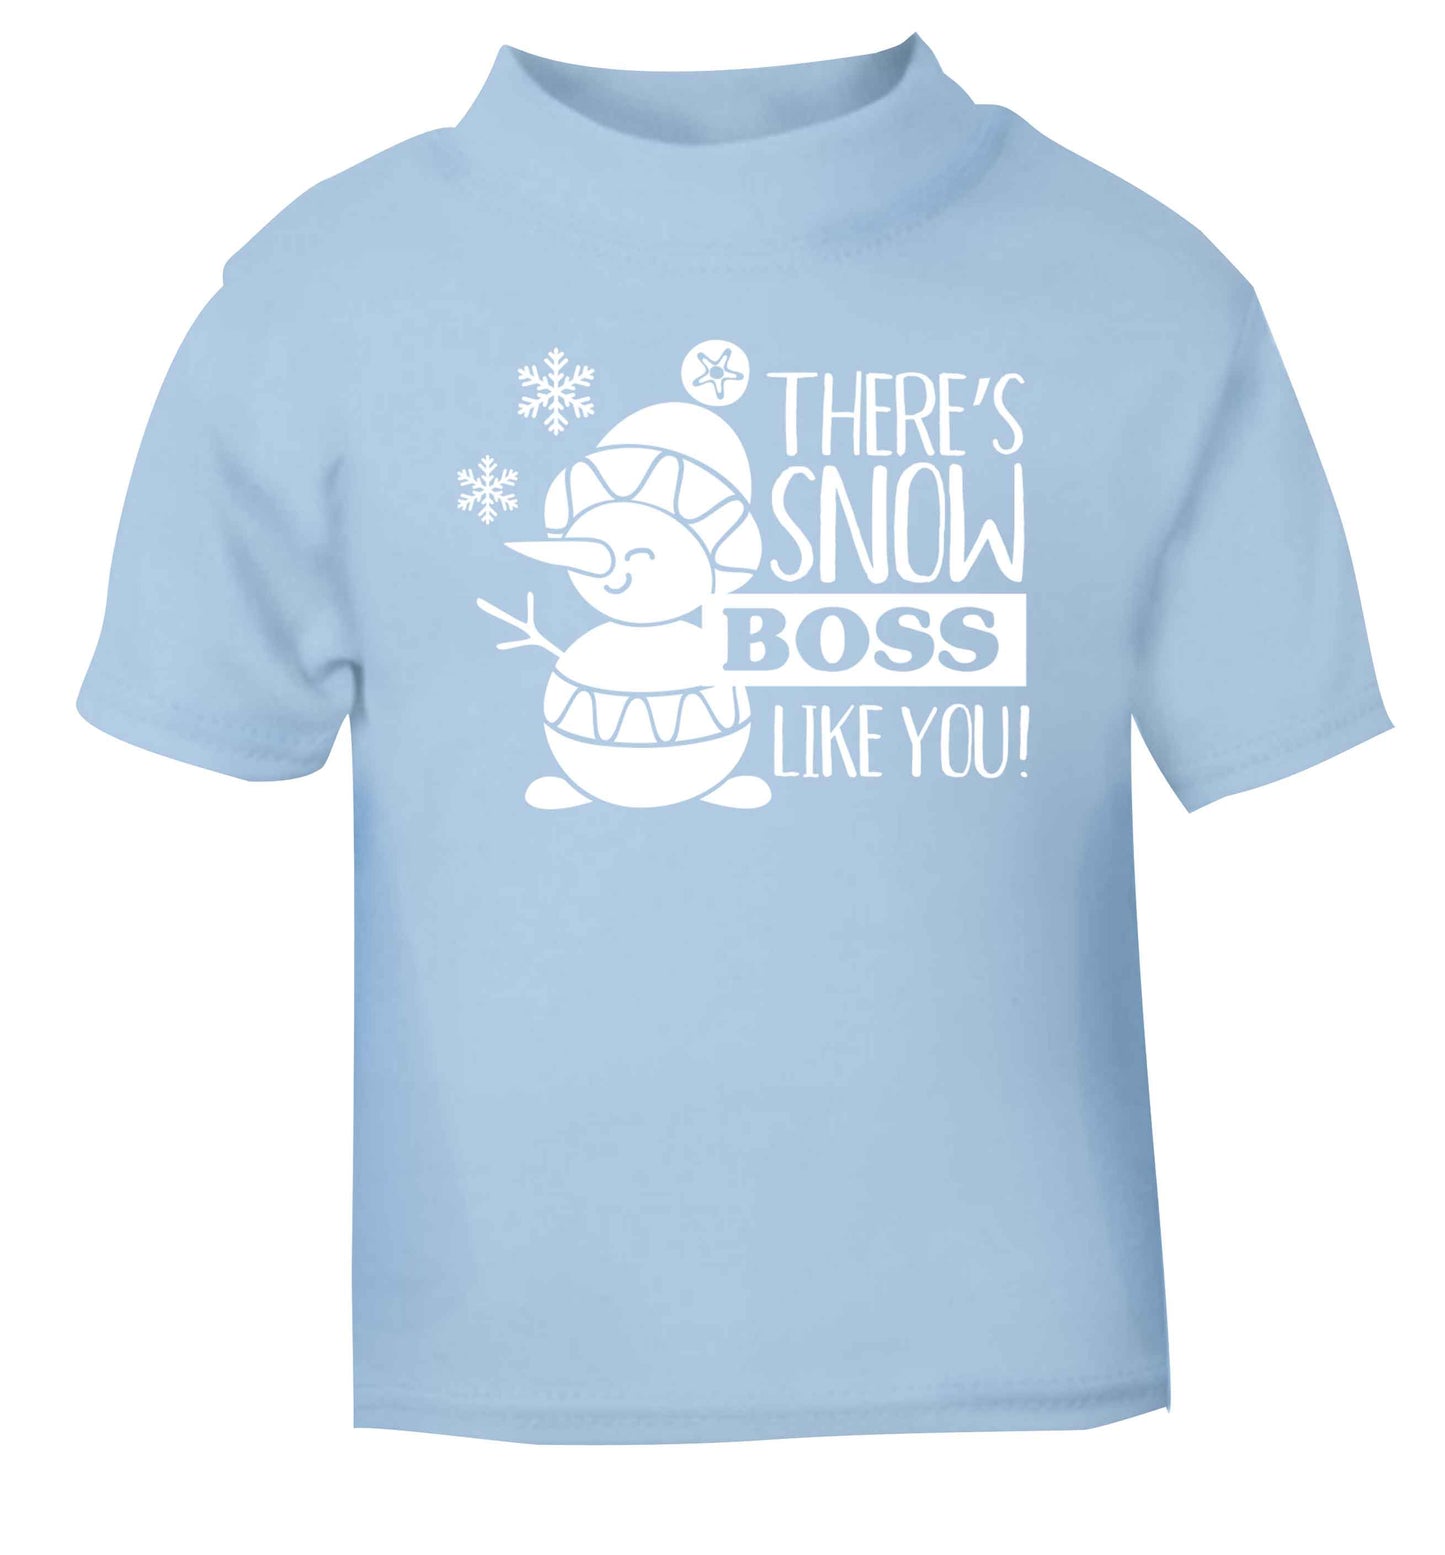 There's snow boss like you light blue baby toddler Tshirt 2 Years